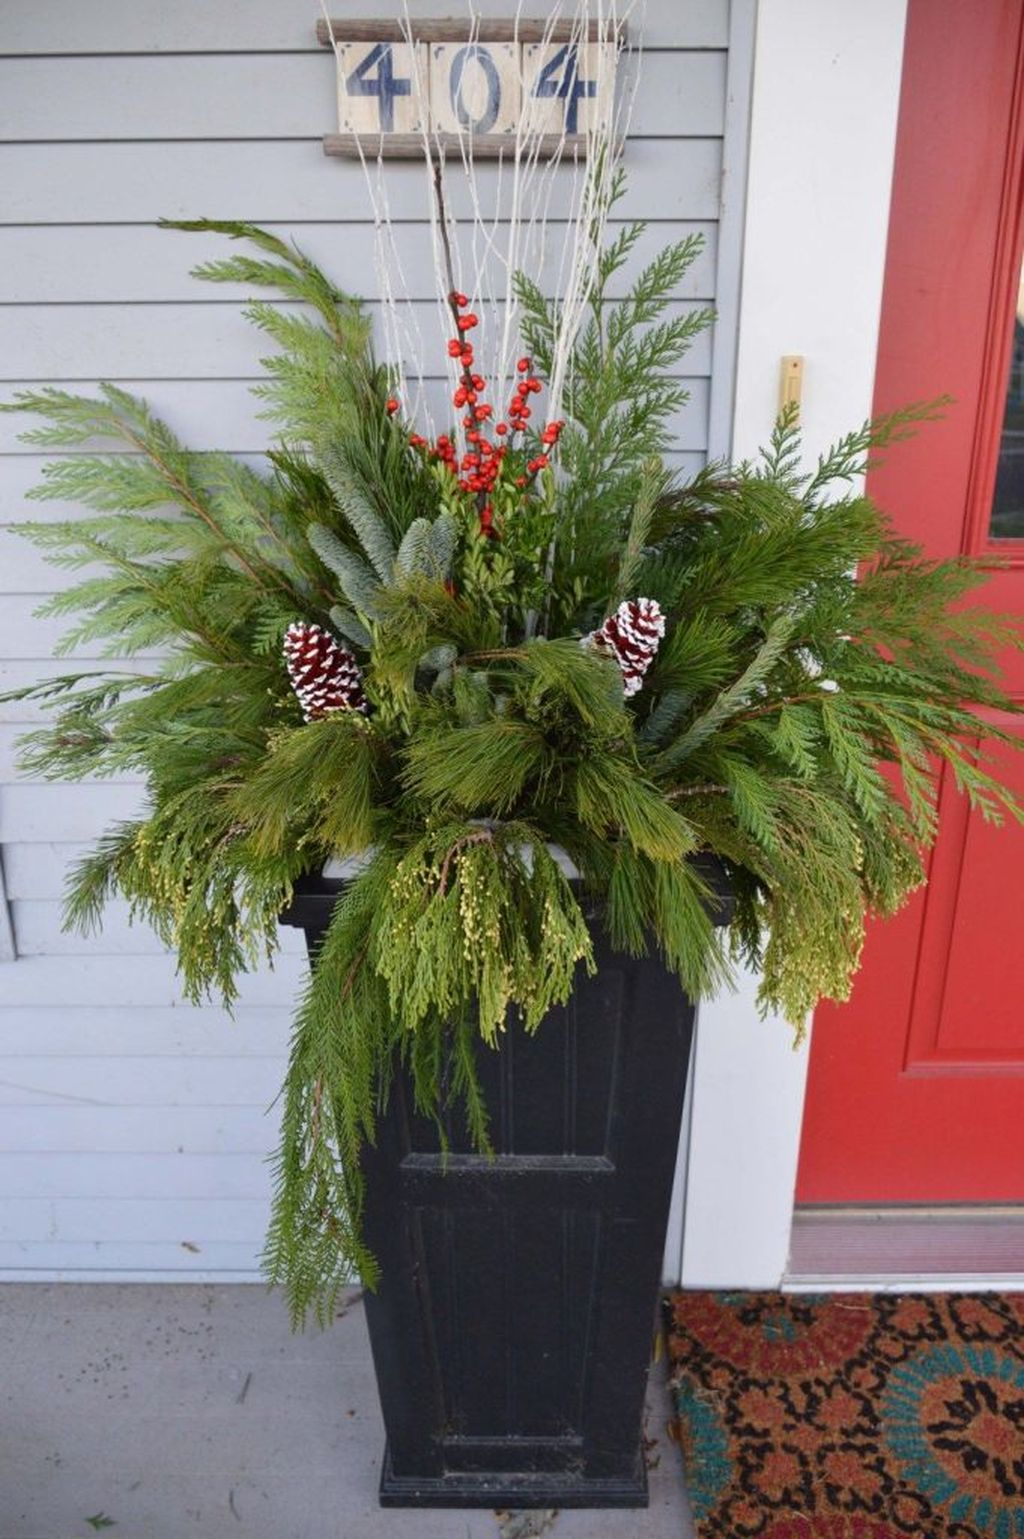 Marvelous Outdoor Holiday Planter Ideas To Beauty Porch Décor 23